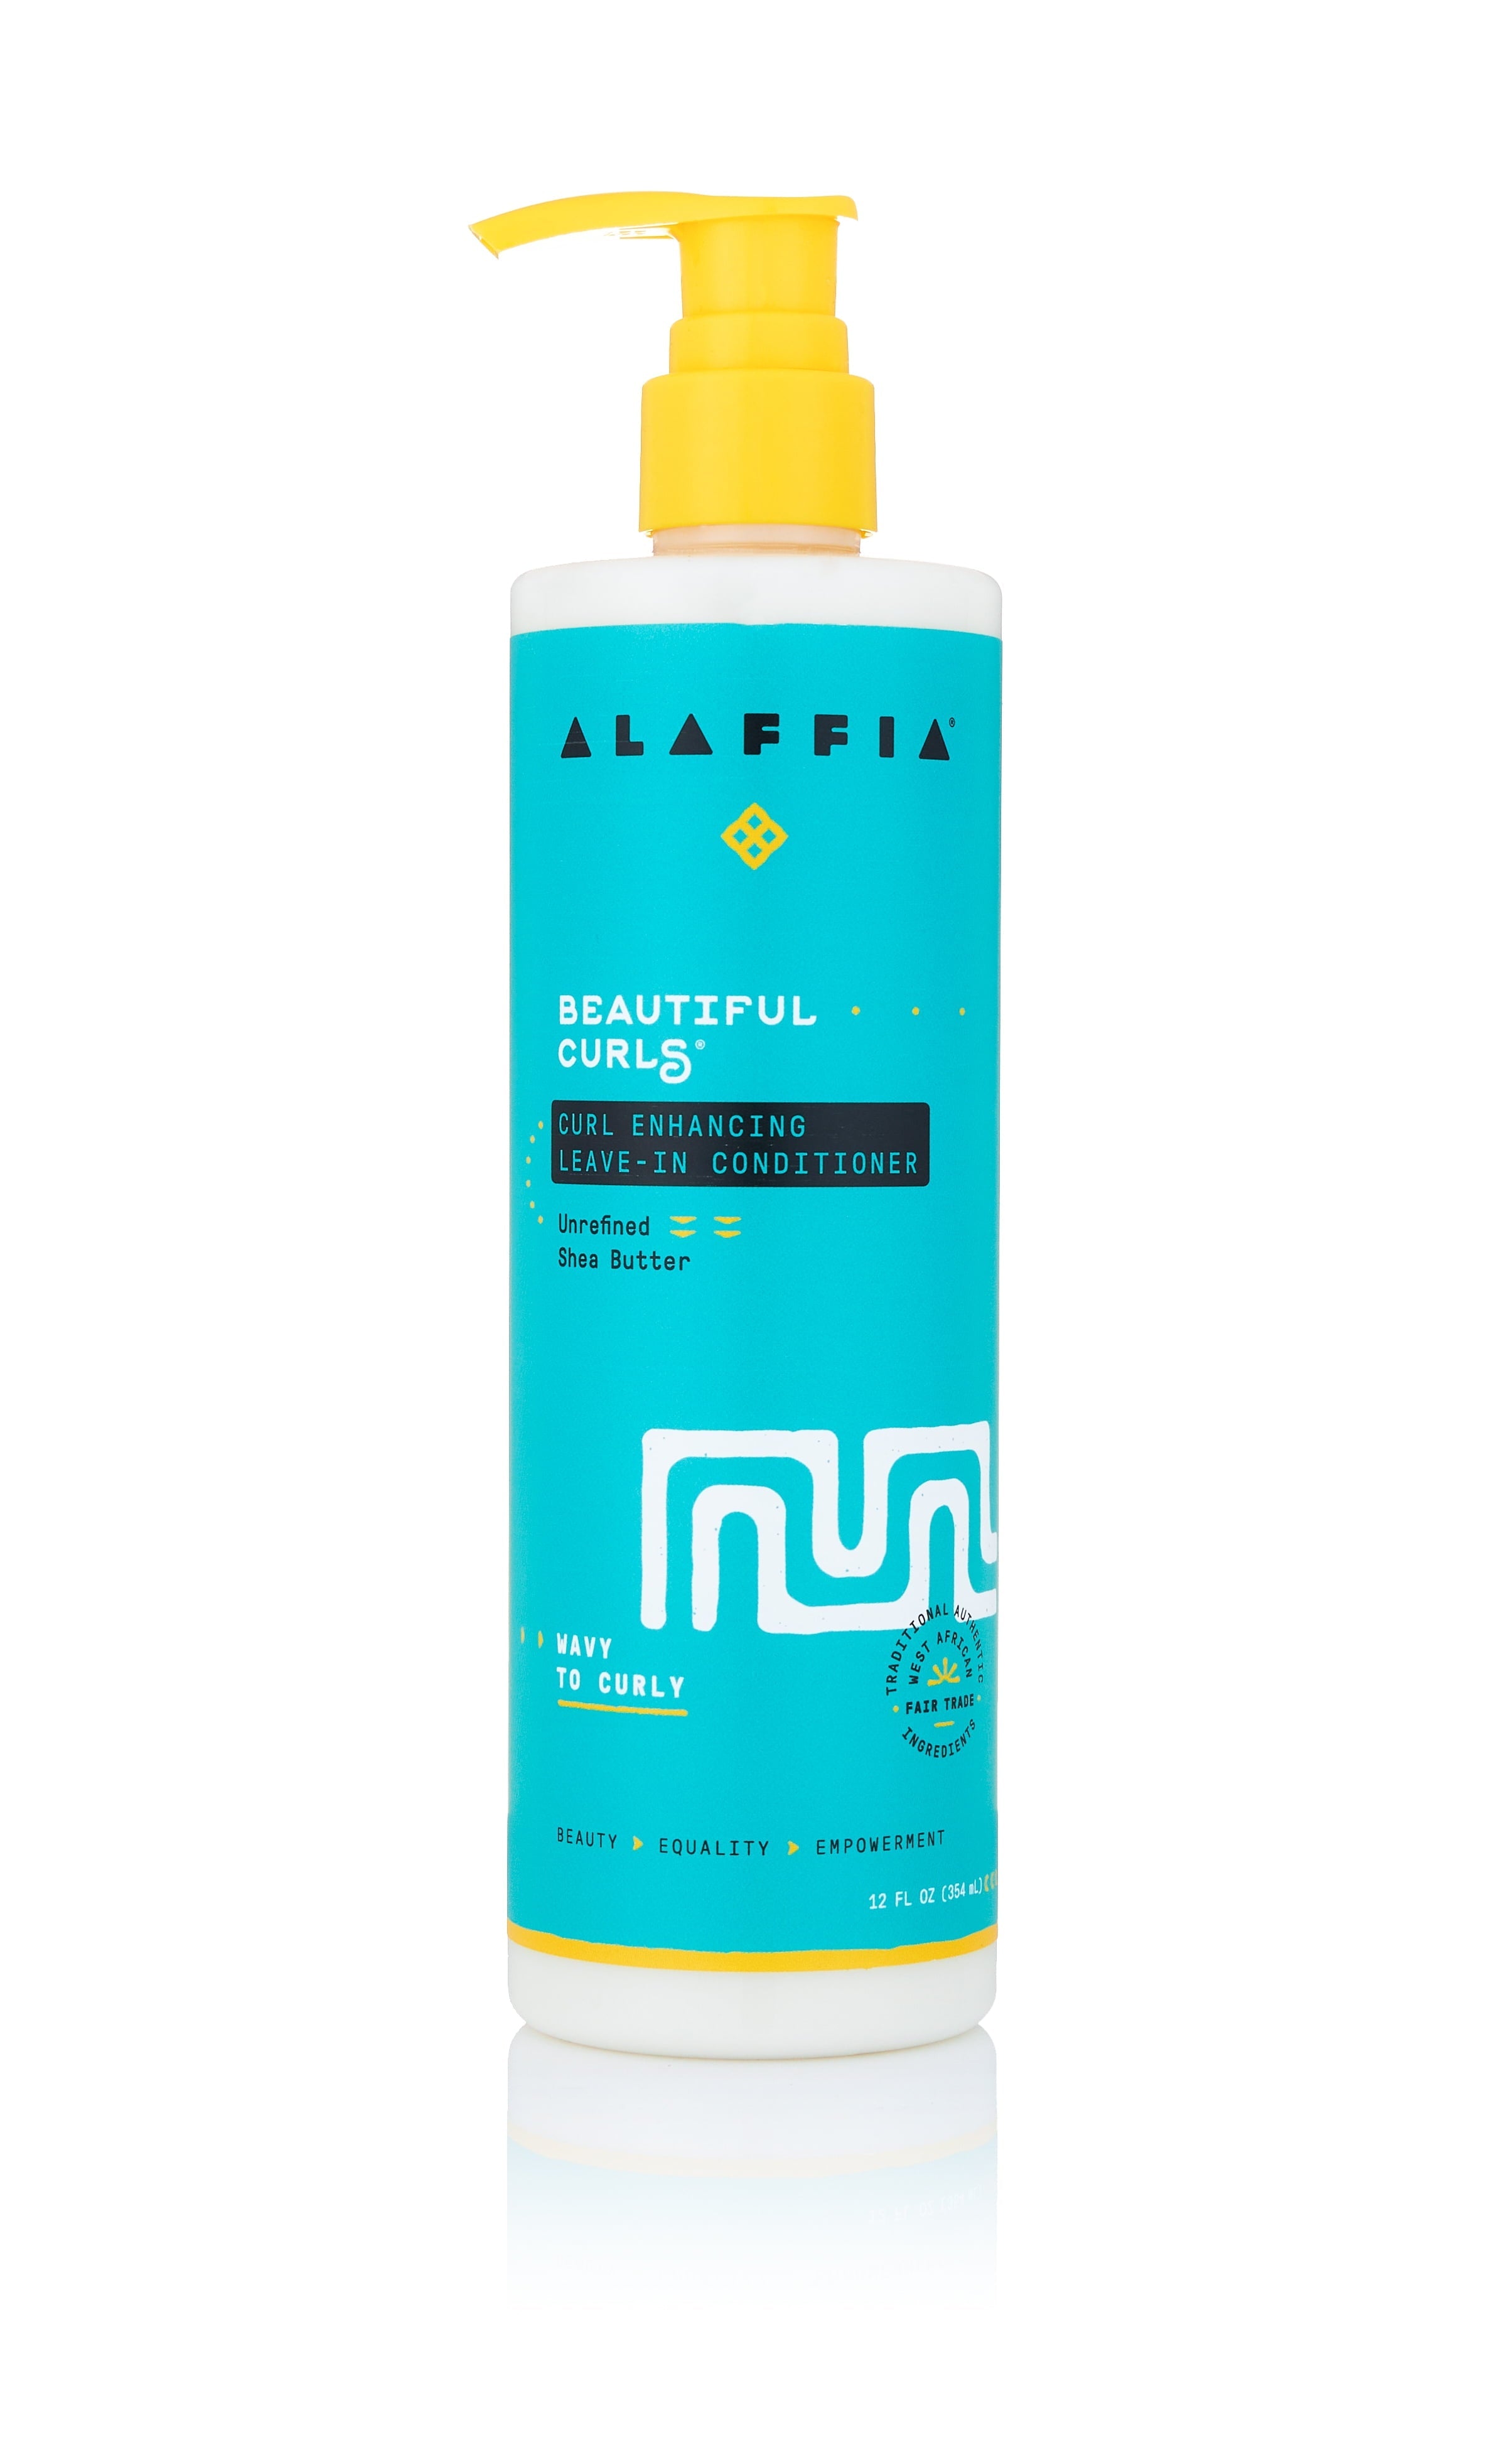 Alaffia, Beautiful Curls, Curl Enhancing Leave-In Conditioner, Wavy to Curly, Unrefined Shea Butter, 12 oz Bottle